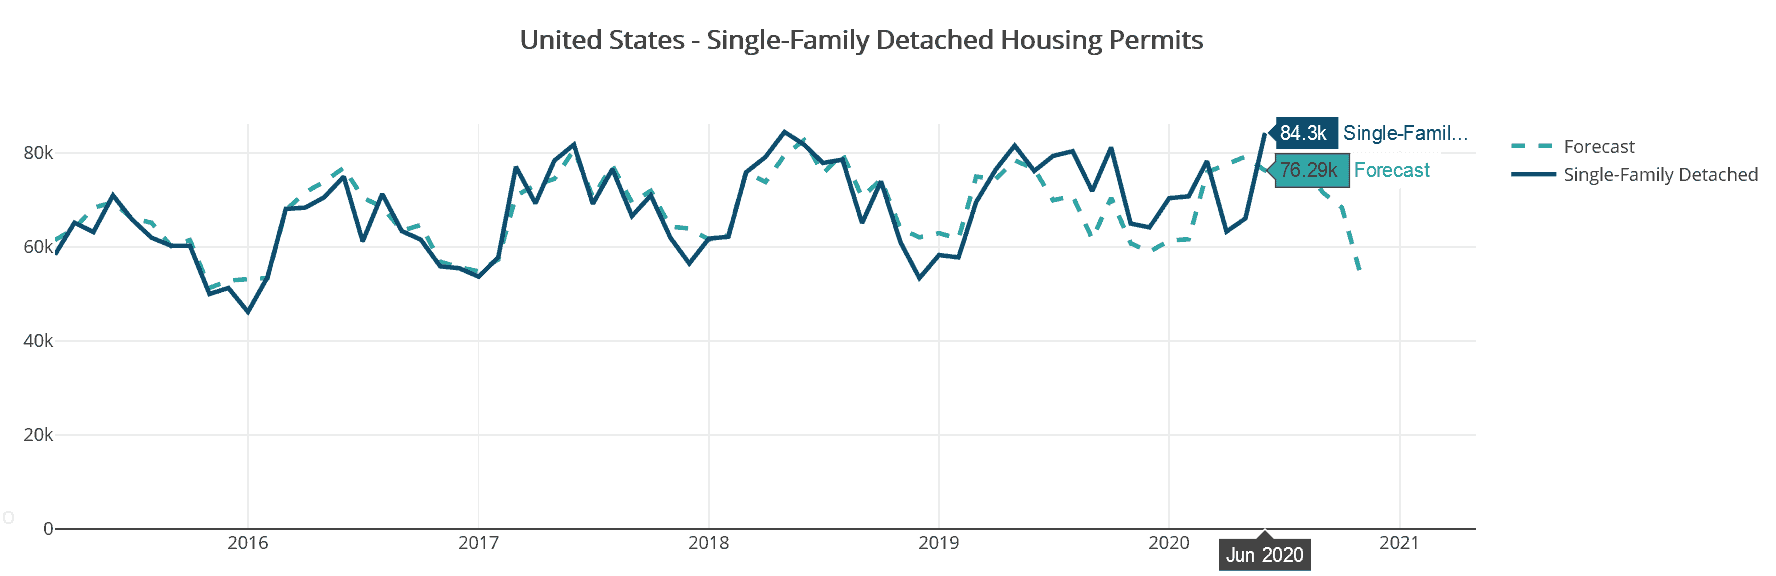 Housing Tides data show U.S. single-family housing permits reach highest level since May 2018. 